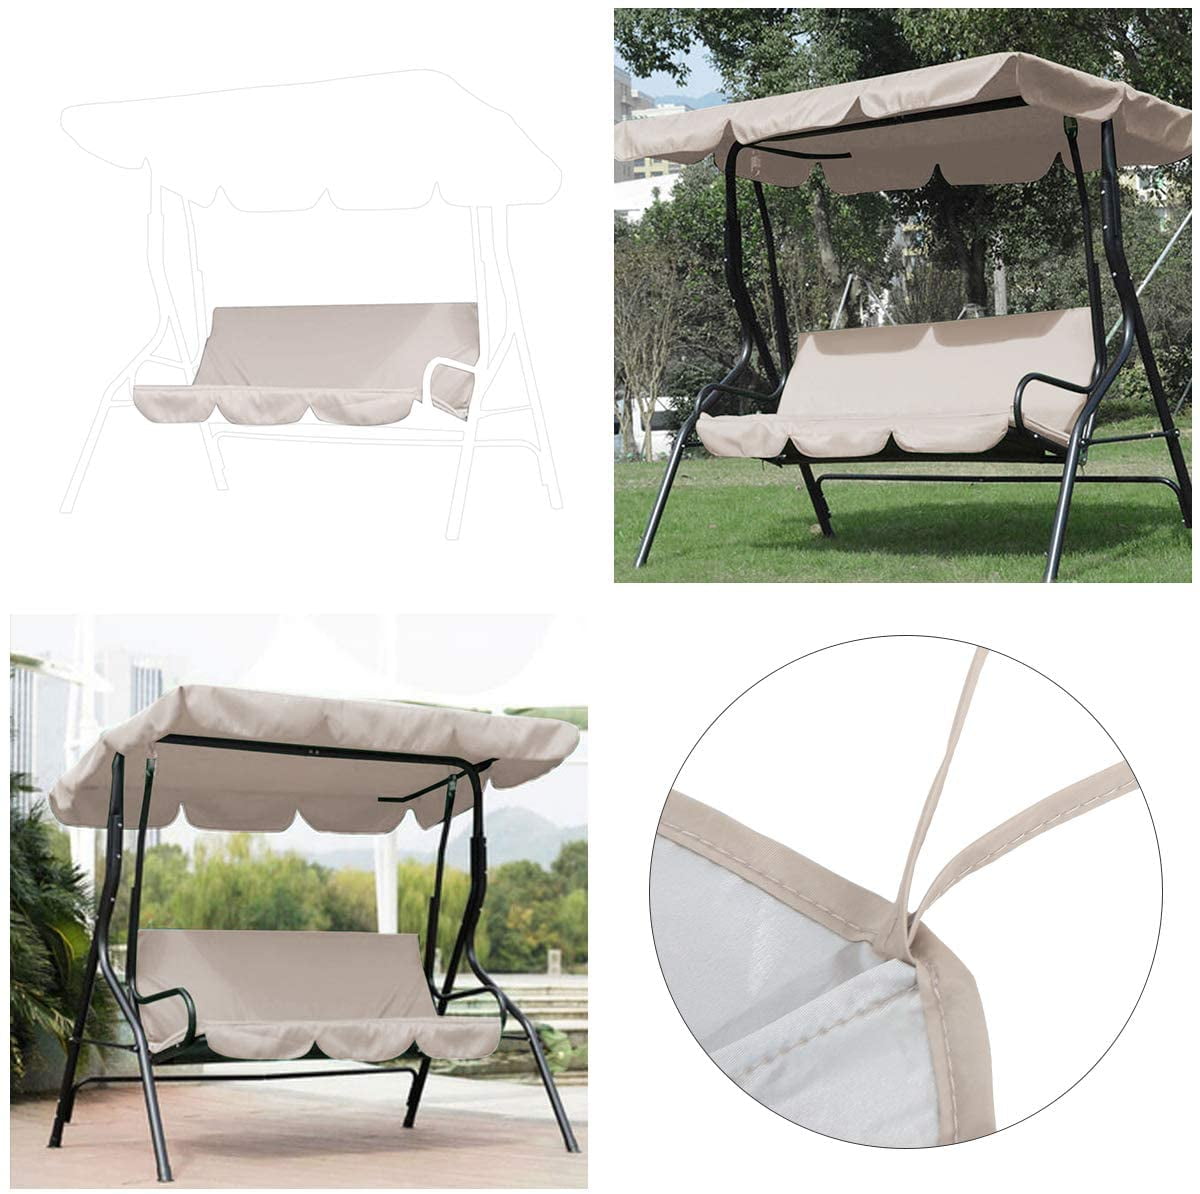 Frame 3-Seater Outdoor Swing Chair Garden Hammock Porch Glider Bed Sling Seat Patio Swing Cushion Cover 3 Person Swing Seat Cover Replacement Anti Dust Protector Coffee Waterproof Patio Swing Canopy Cover Set 